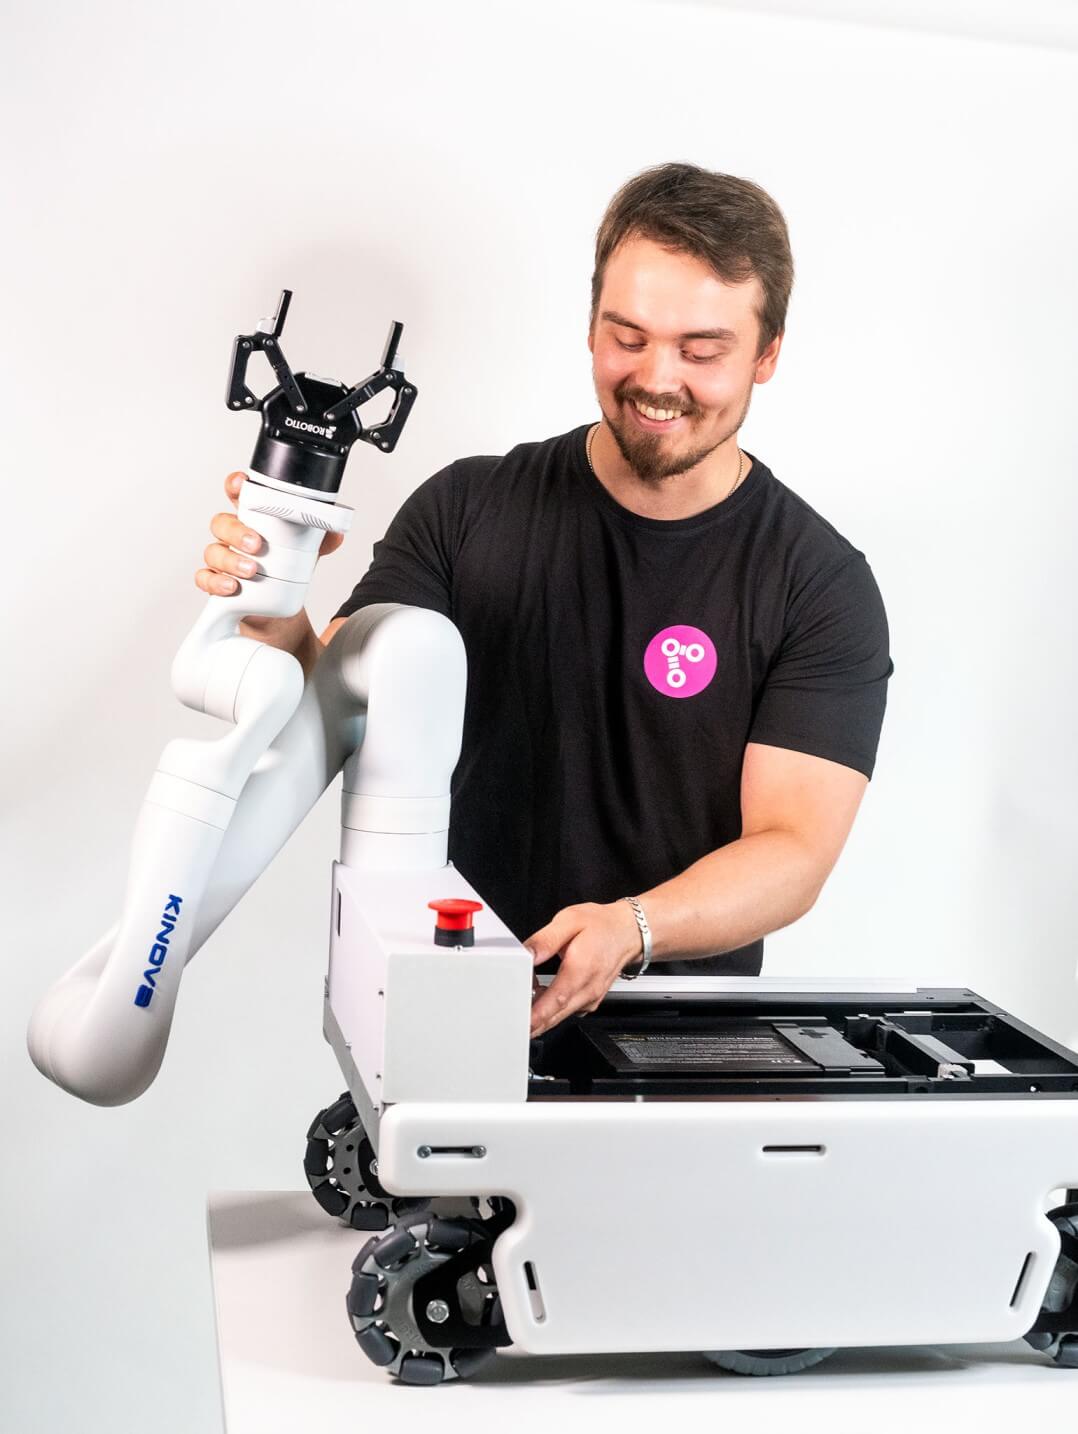 A mobile robot with a white robotic arm and a smiling man standing behind it. The man is wearing a pink Probot logo on his shirt.